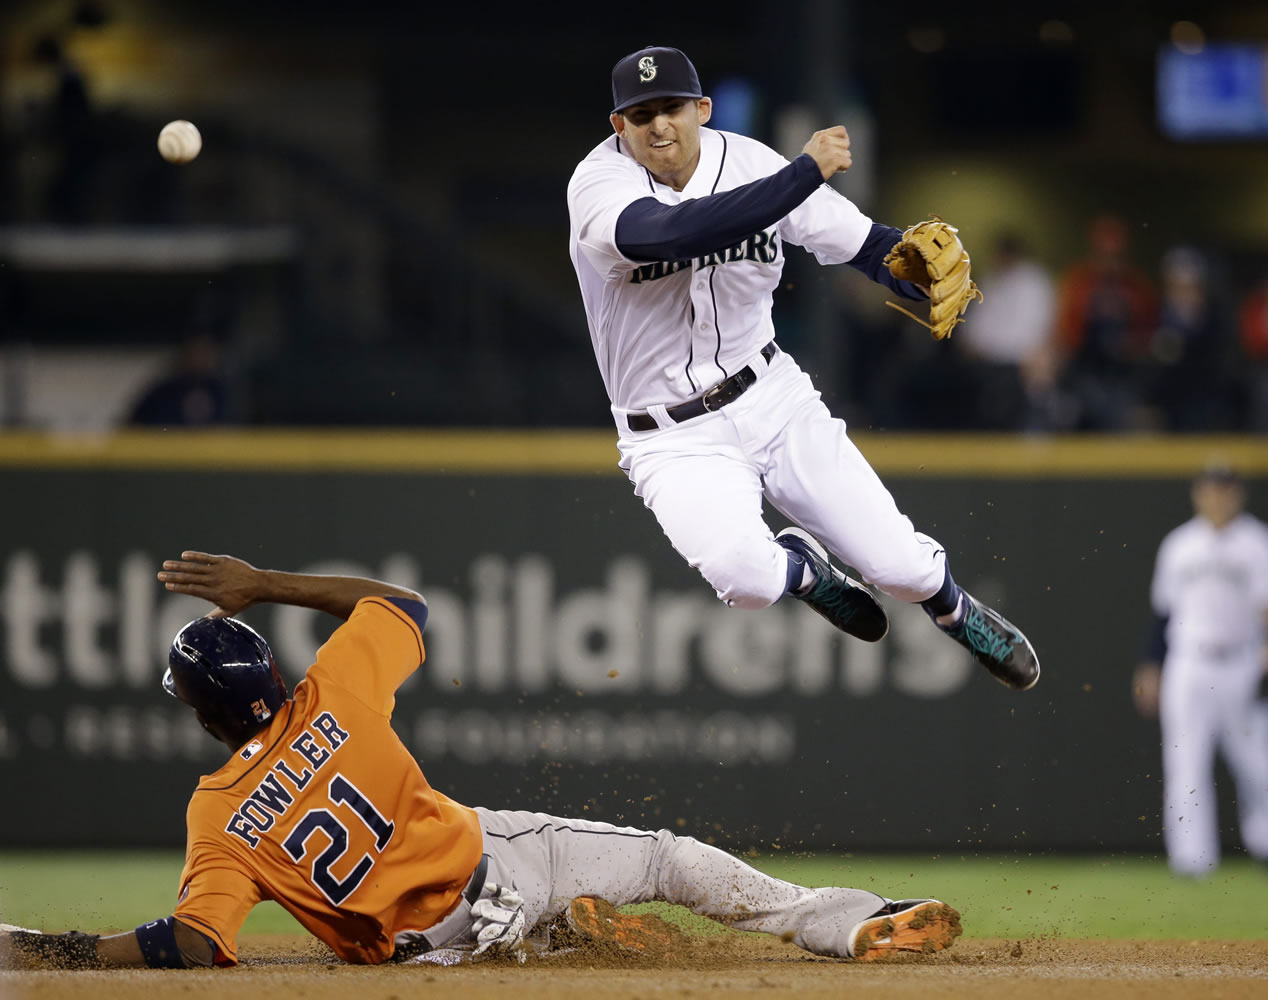 Seattle Mariners shortstop Brad Miller, right, leaps out of the way after forcing out Houston Astros' Dexter Fowler at second base in the fourth inning of a baseball game Sunday, May 25, 2014, in Seattle. Miller completed the play to first for the double play.